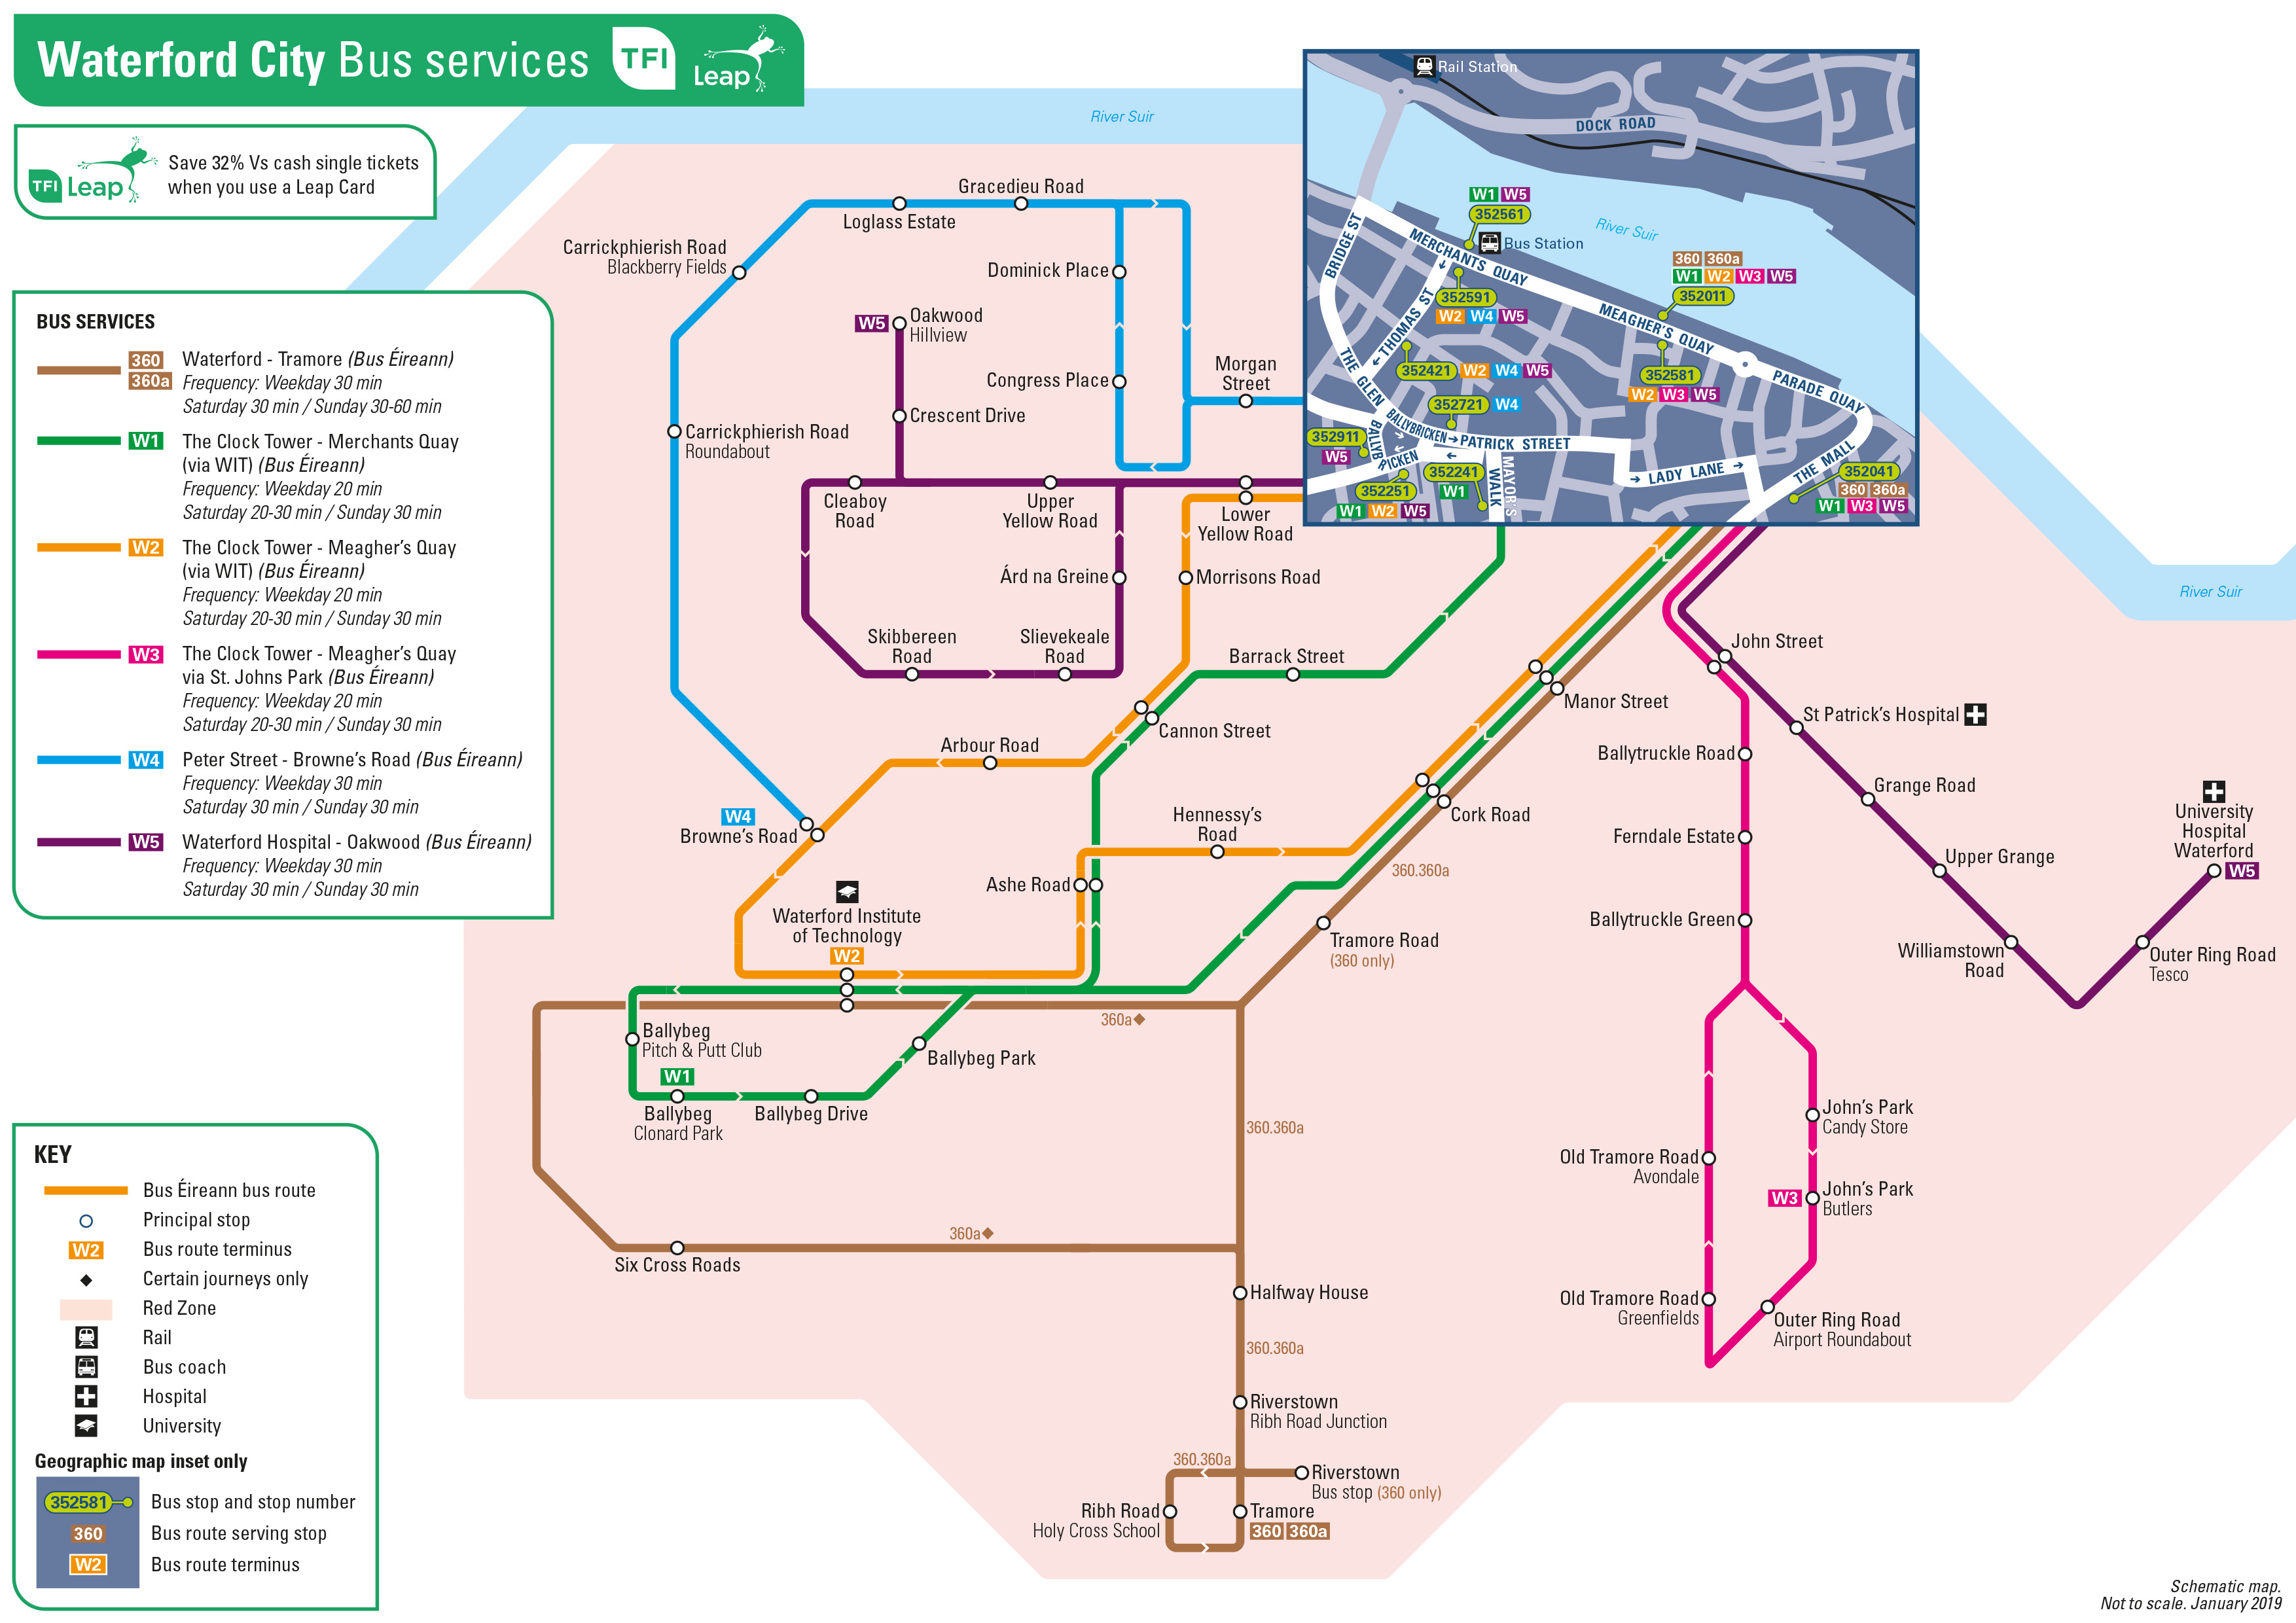 Waterford City Bus Services Map